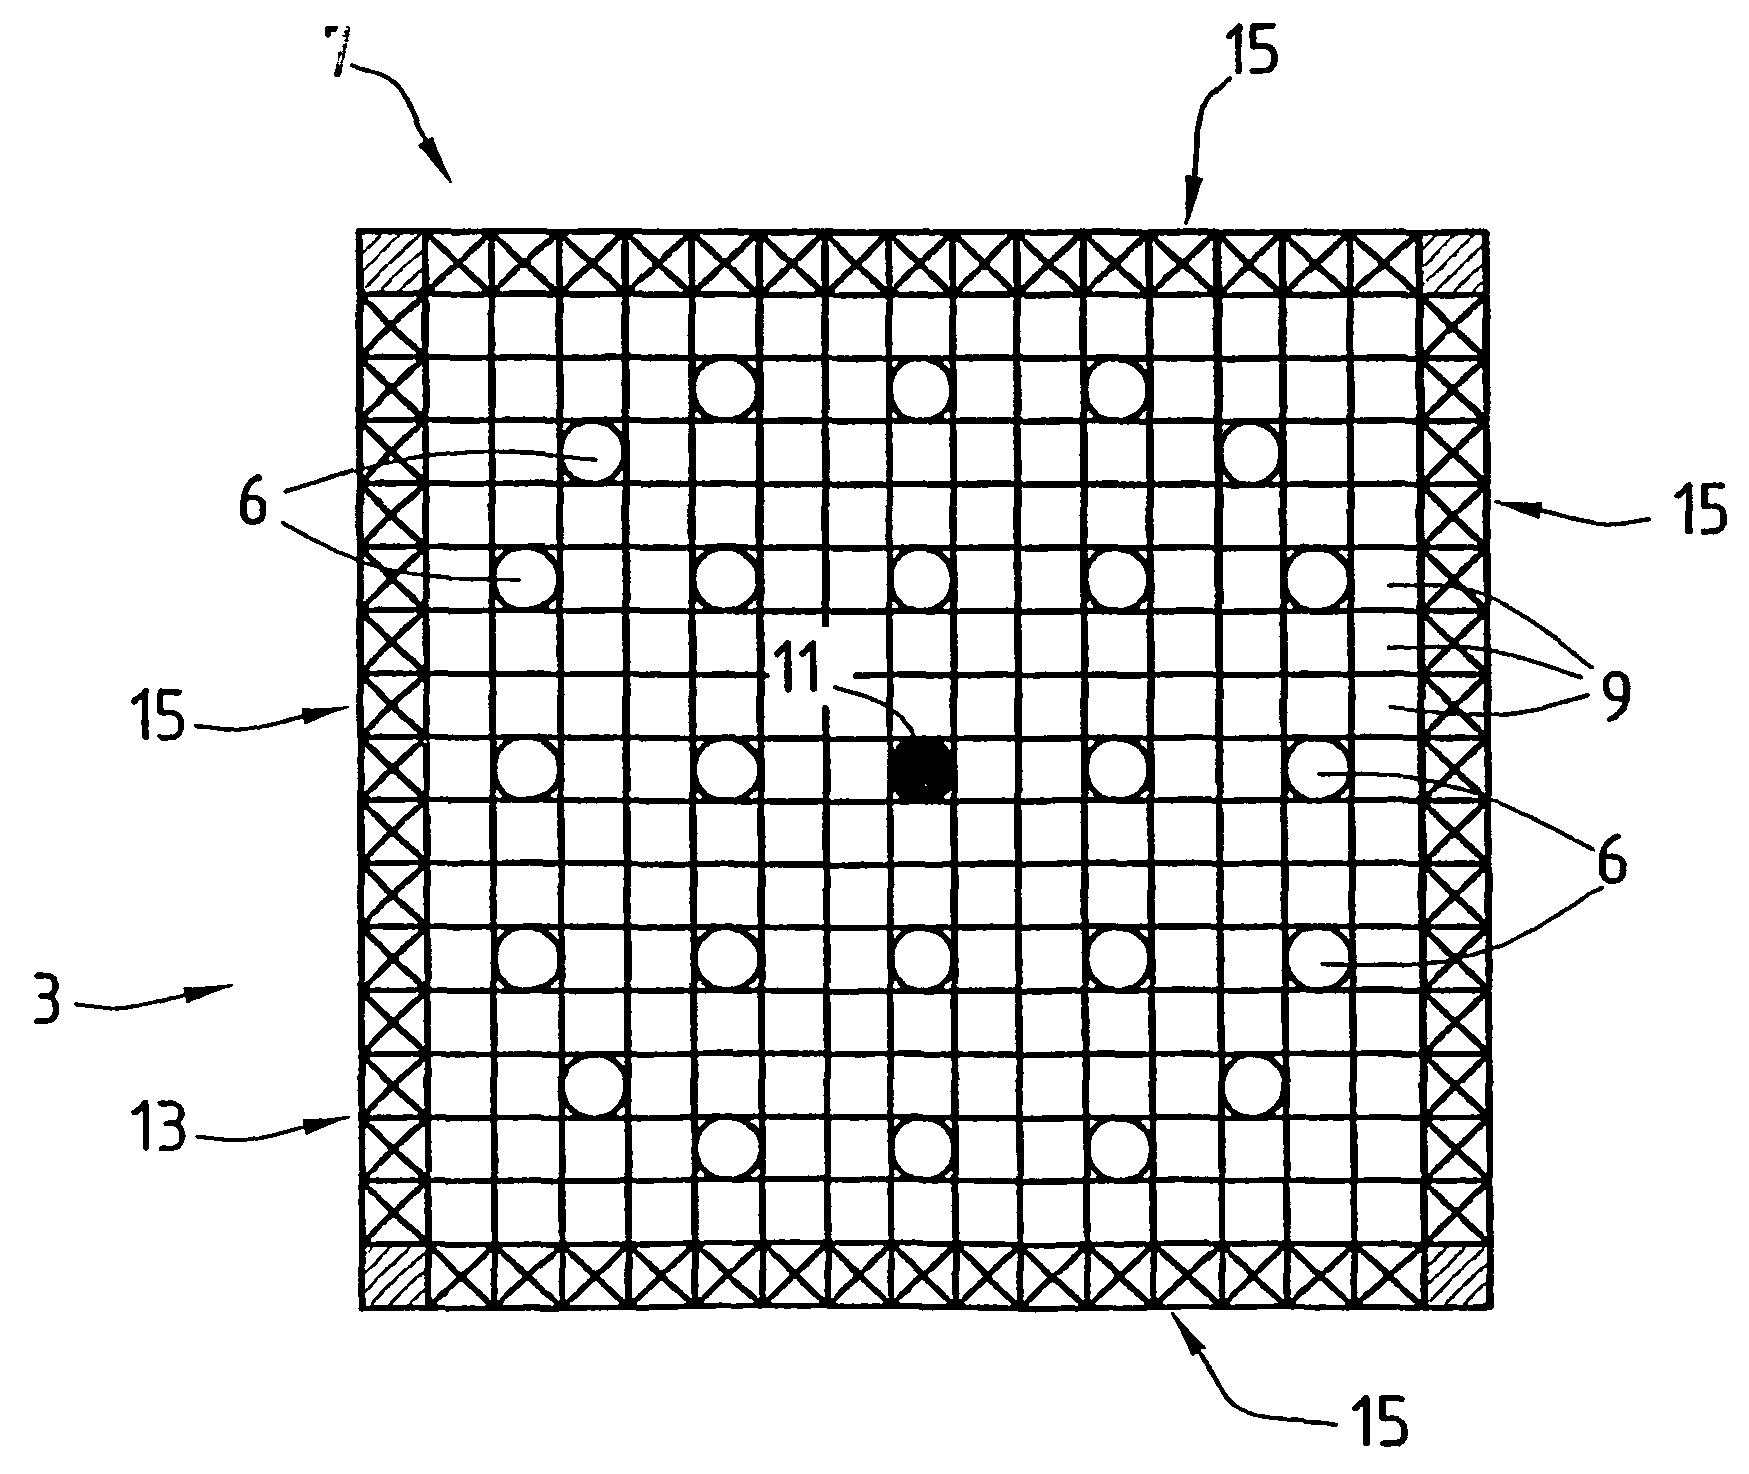 Fuel assembly for a pressurized water nuclear reactor containing plutonium-free enriched uranium